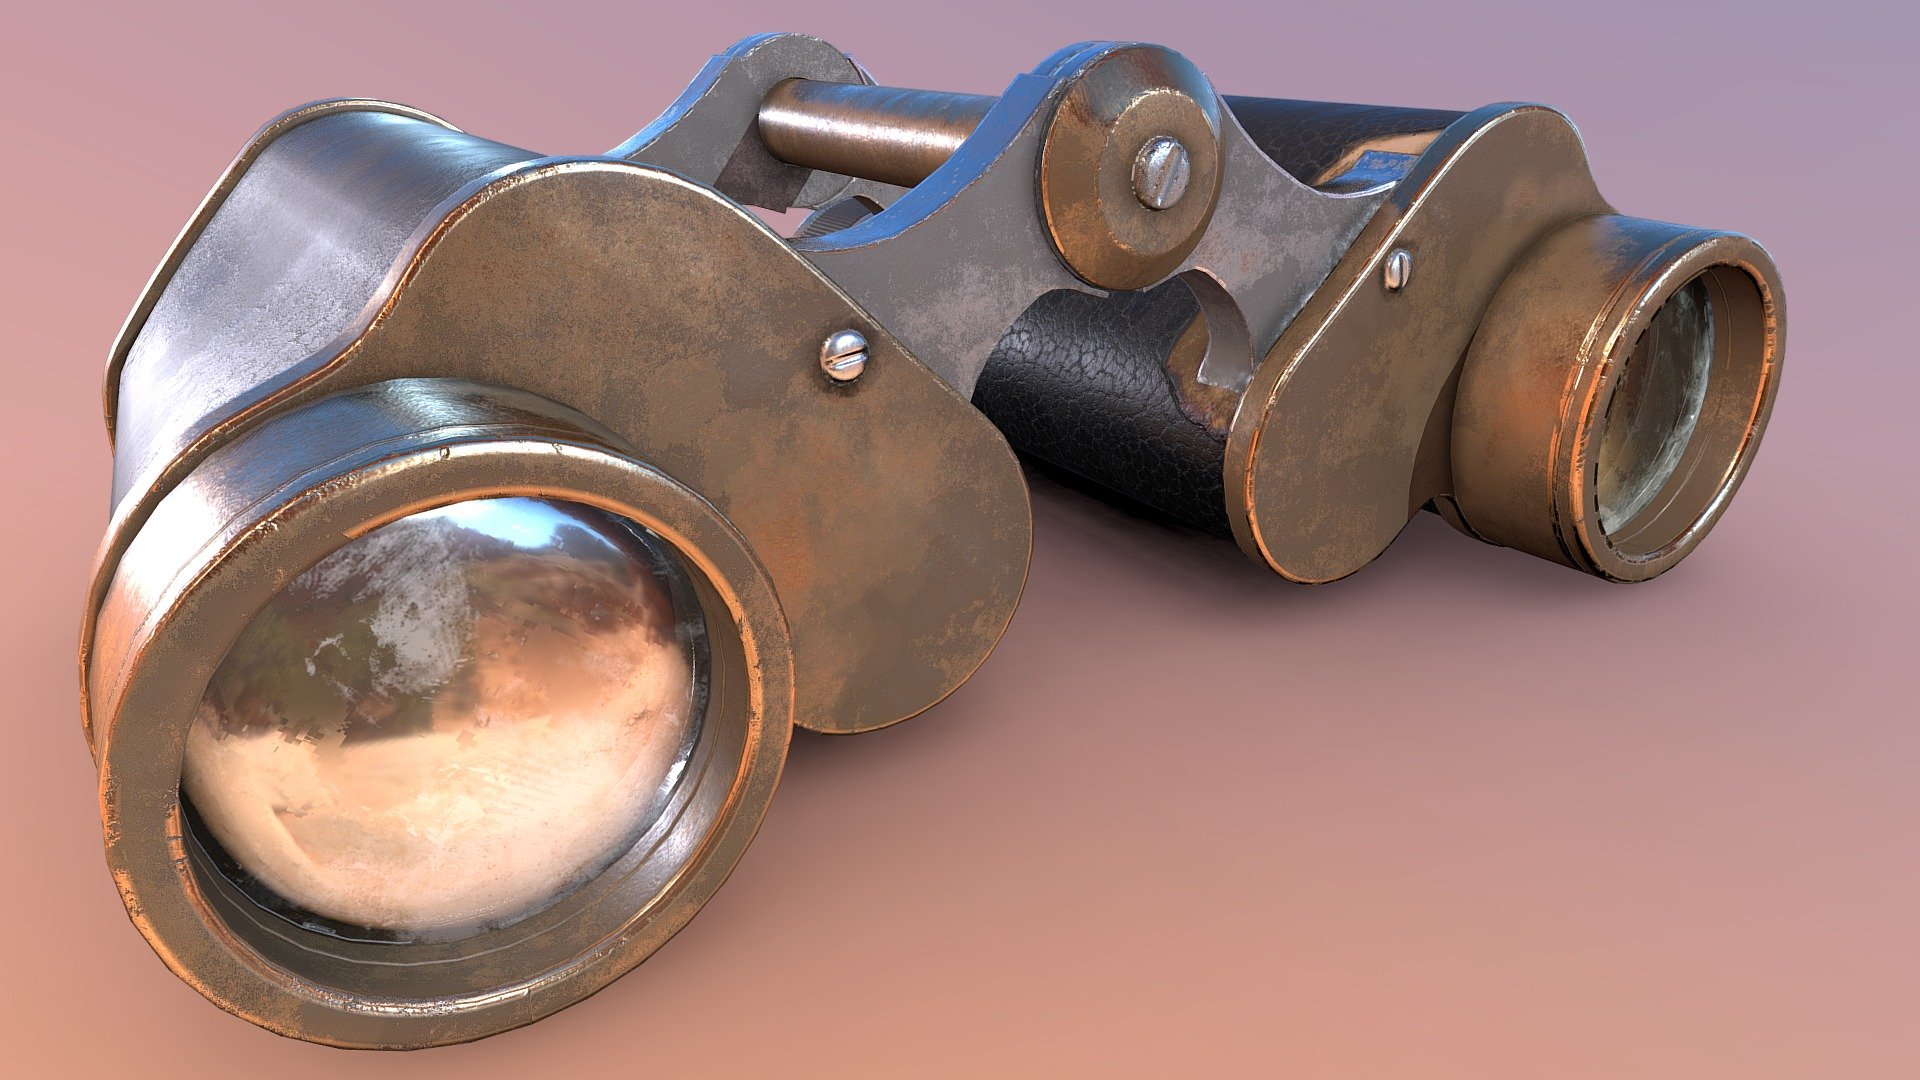 WW1 
Game Prop created during my time with the Vertexschool under SDA Saudi Digital Academy.
This work was made as part of the Vertex School training program and was supported by Saudi Digital Academy.
The Binocular was Built-in Blender and textured by Substance painter 3d model